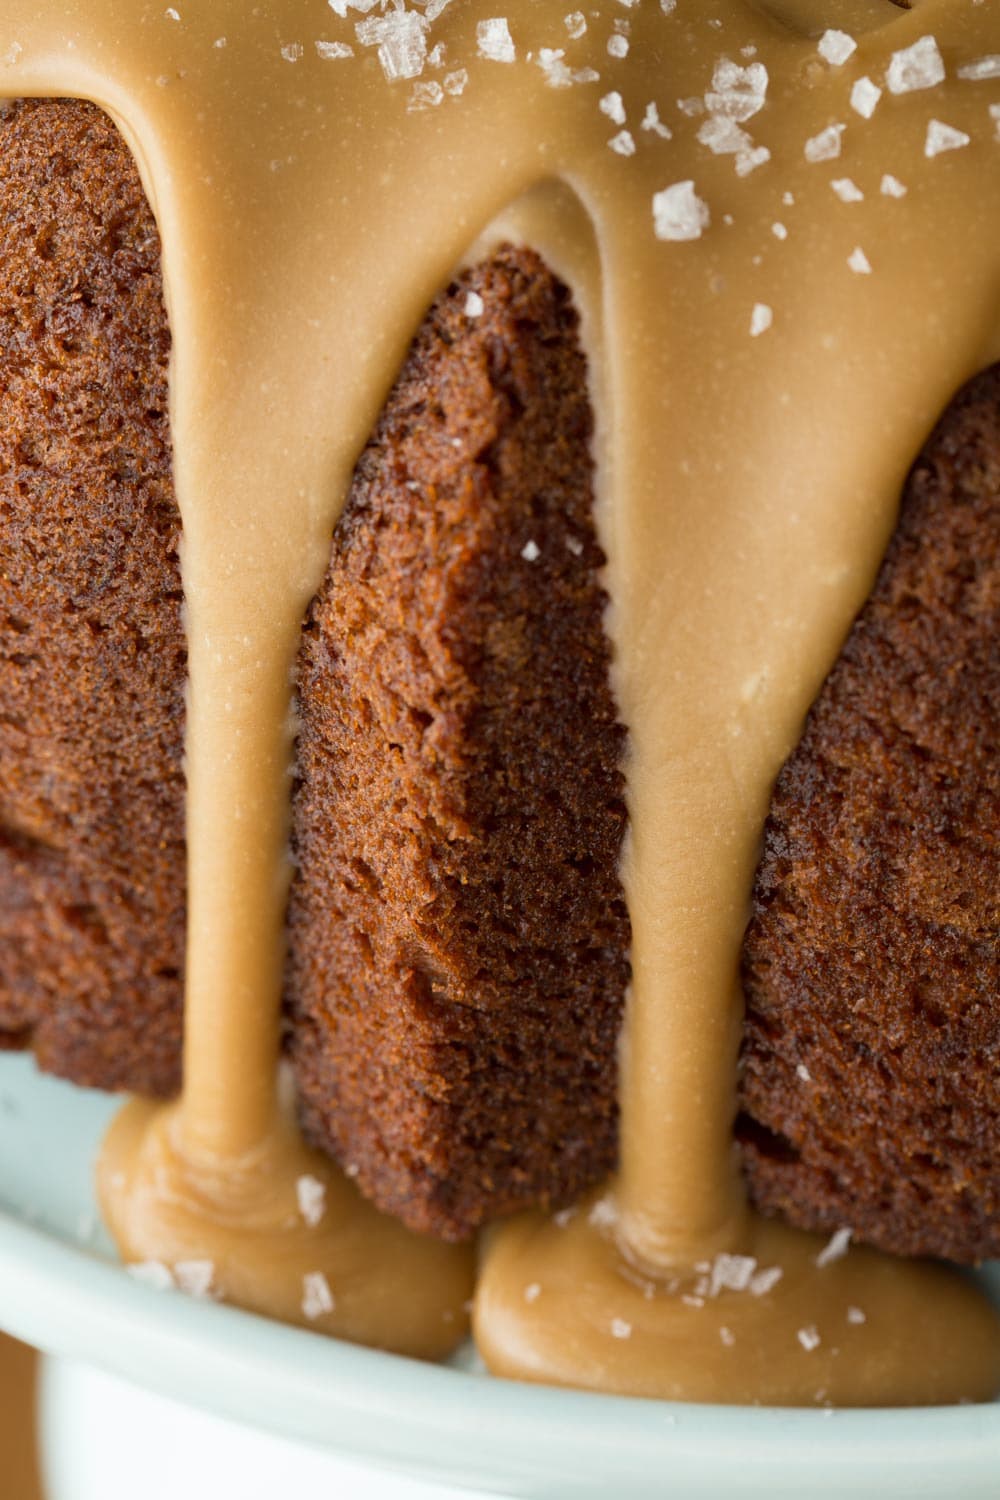 Banana Pound Cake with Salted Toffee Icing - the most delicious, easy banana cake you'll ever make! thecafesucrefarine.com